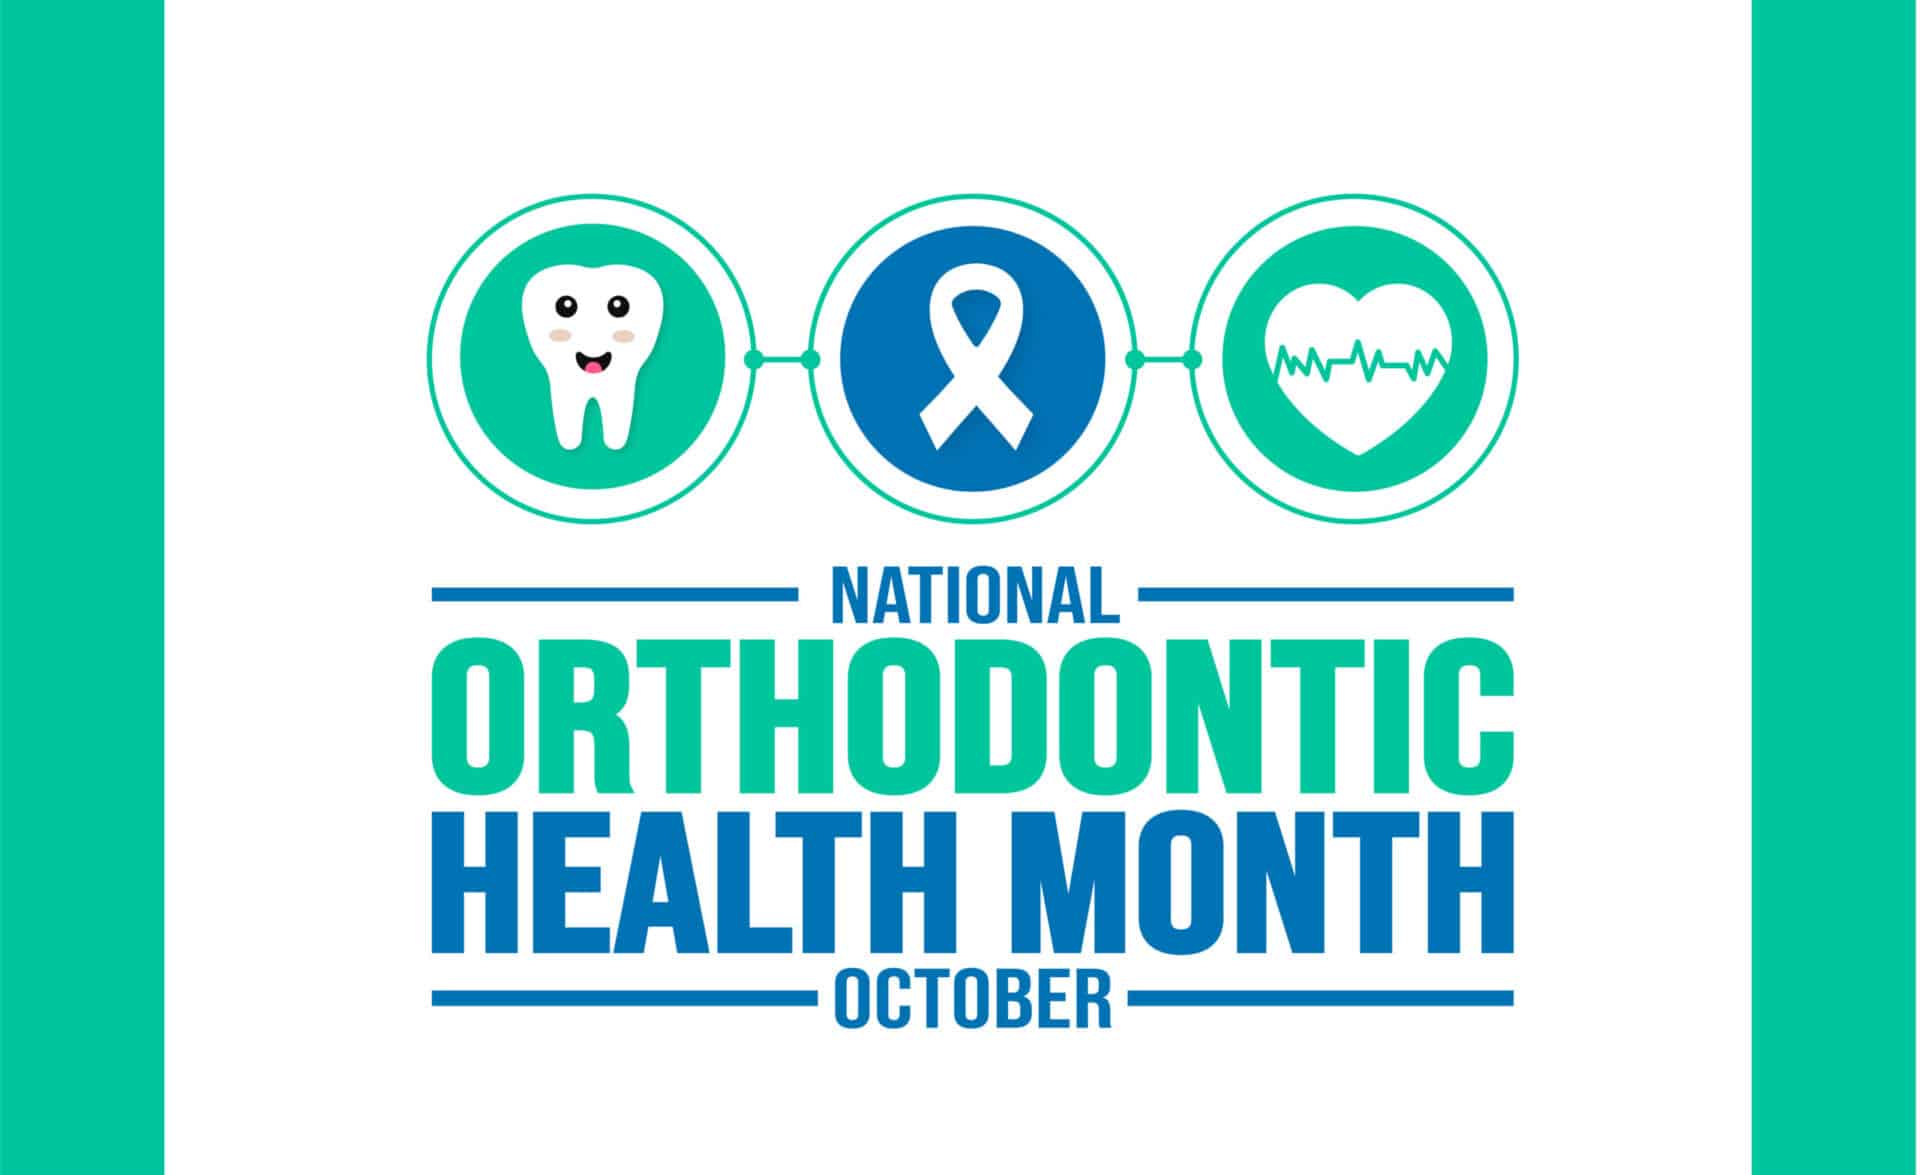 orthodontic care in foothill and holladay salt late city, ut